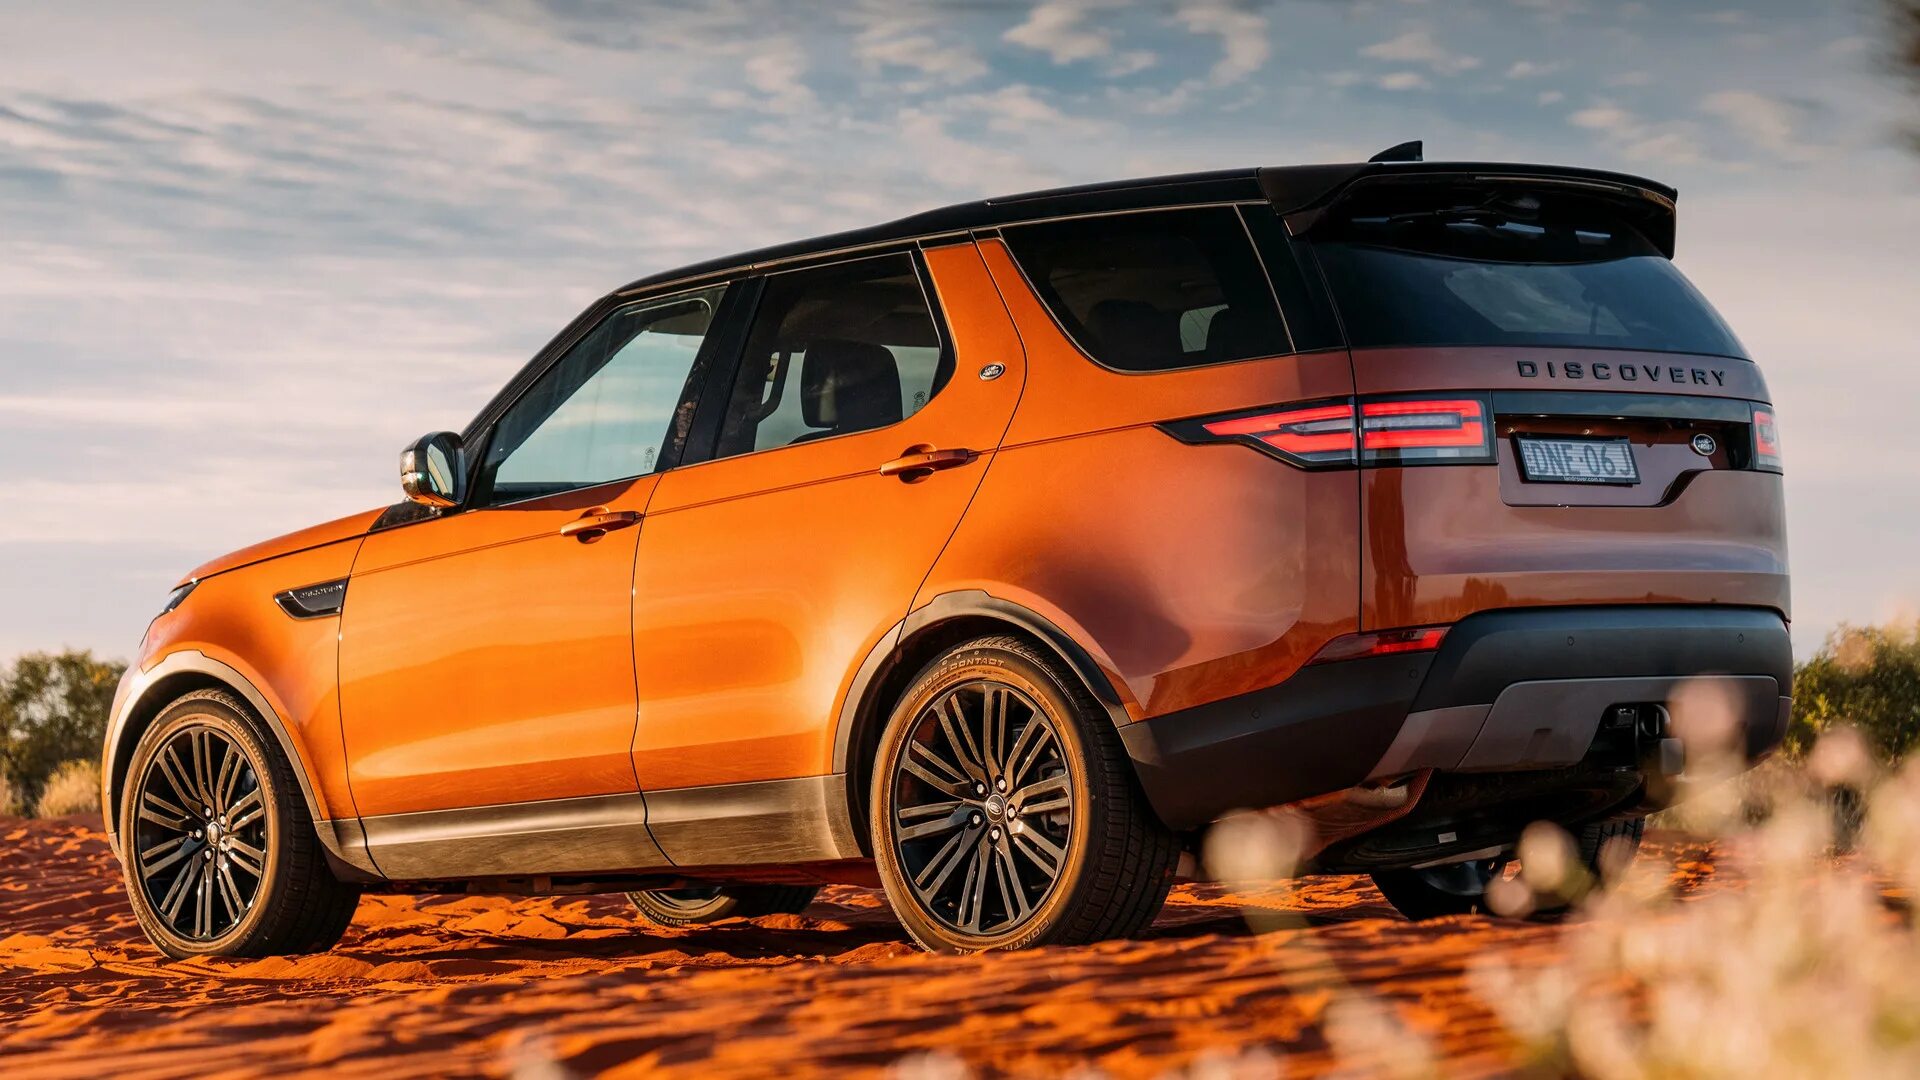 First discovery. Land Rover Discovery 5. Ленд Ровер Дискавери 2017. Land Rover Discovery 5 first Edition. Дискавери 5 2017.